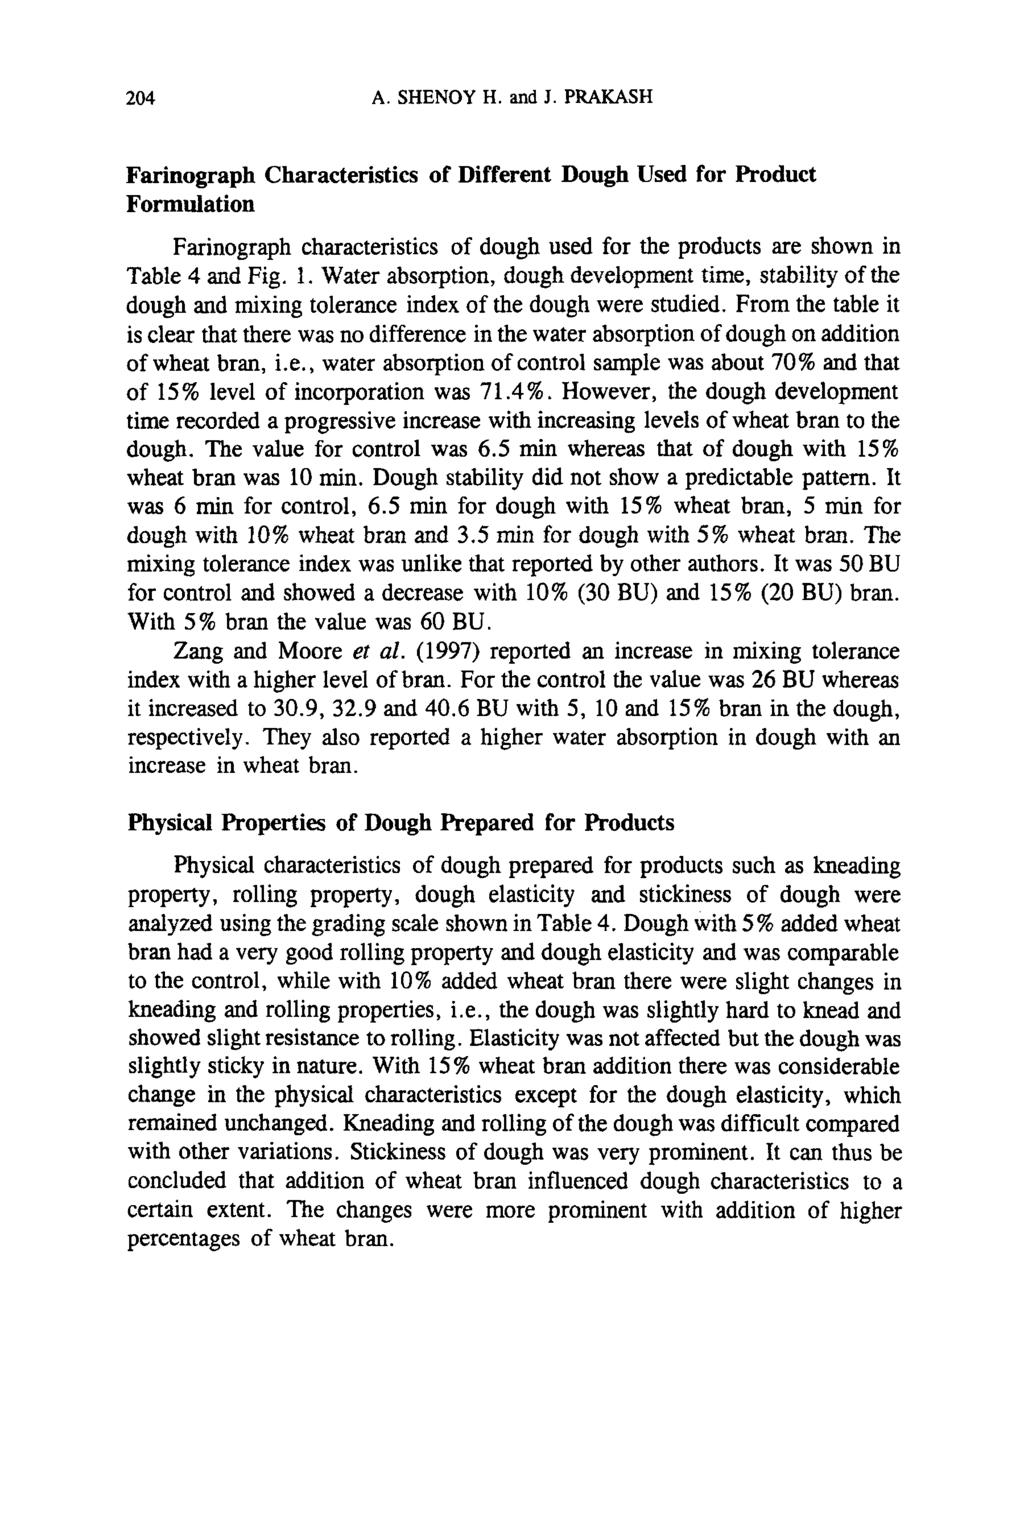 204 A. SHENOY H. and J. PRAKASH Farinograph Characteristics of Different Dough Used for Product Formulation Farinograph characteristics of dough used for the products are shown in Table 4 and Fig. 1.